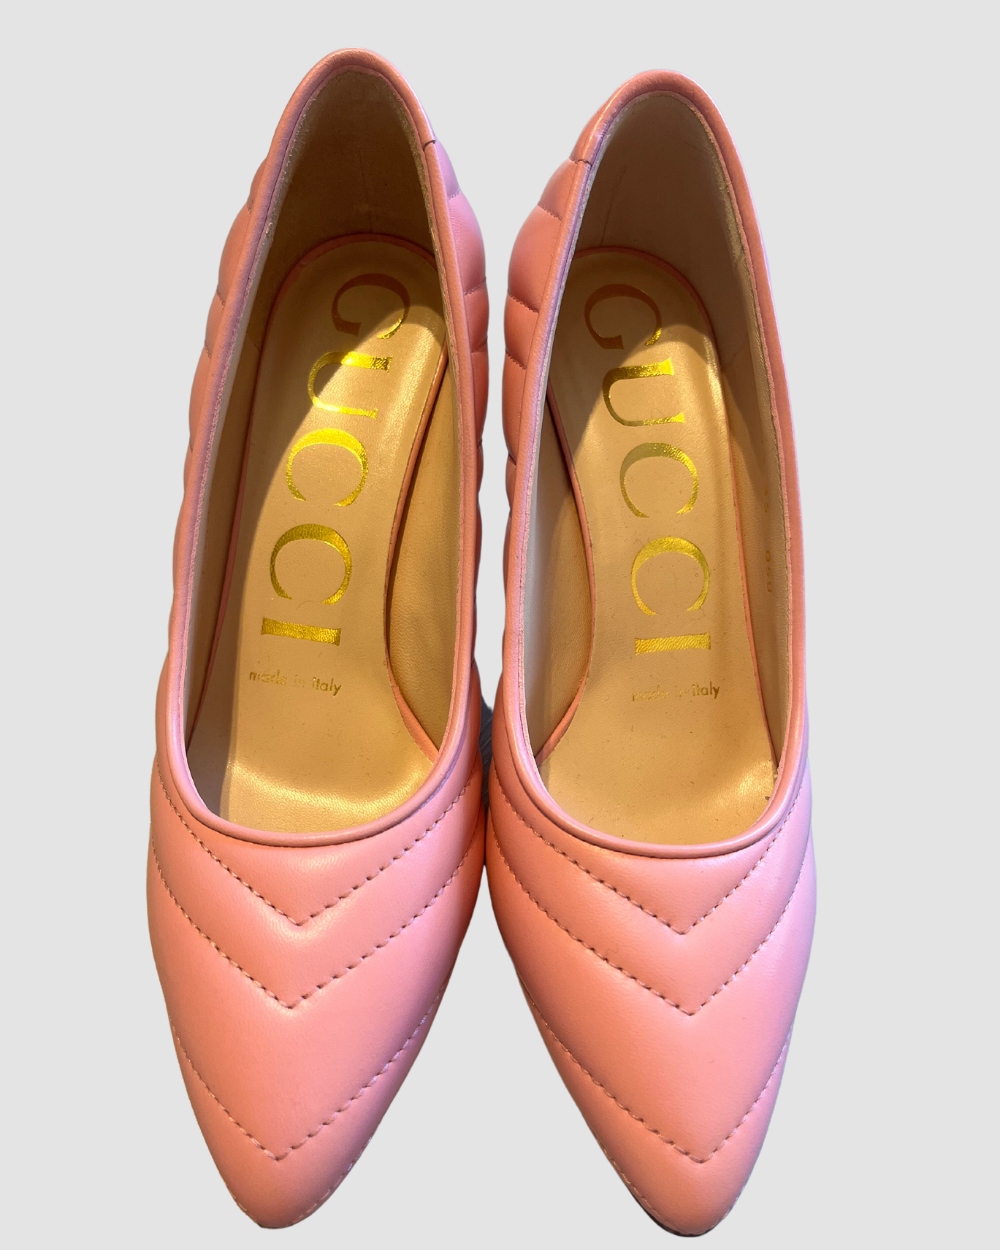 Gucci Pink Marmont Leather Heels